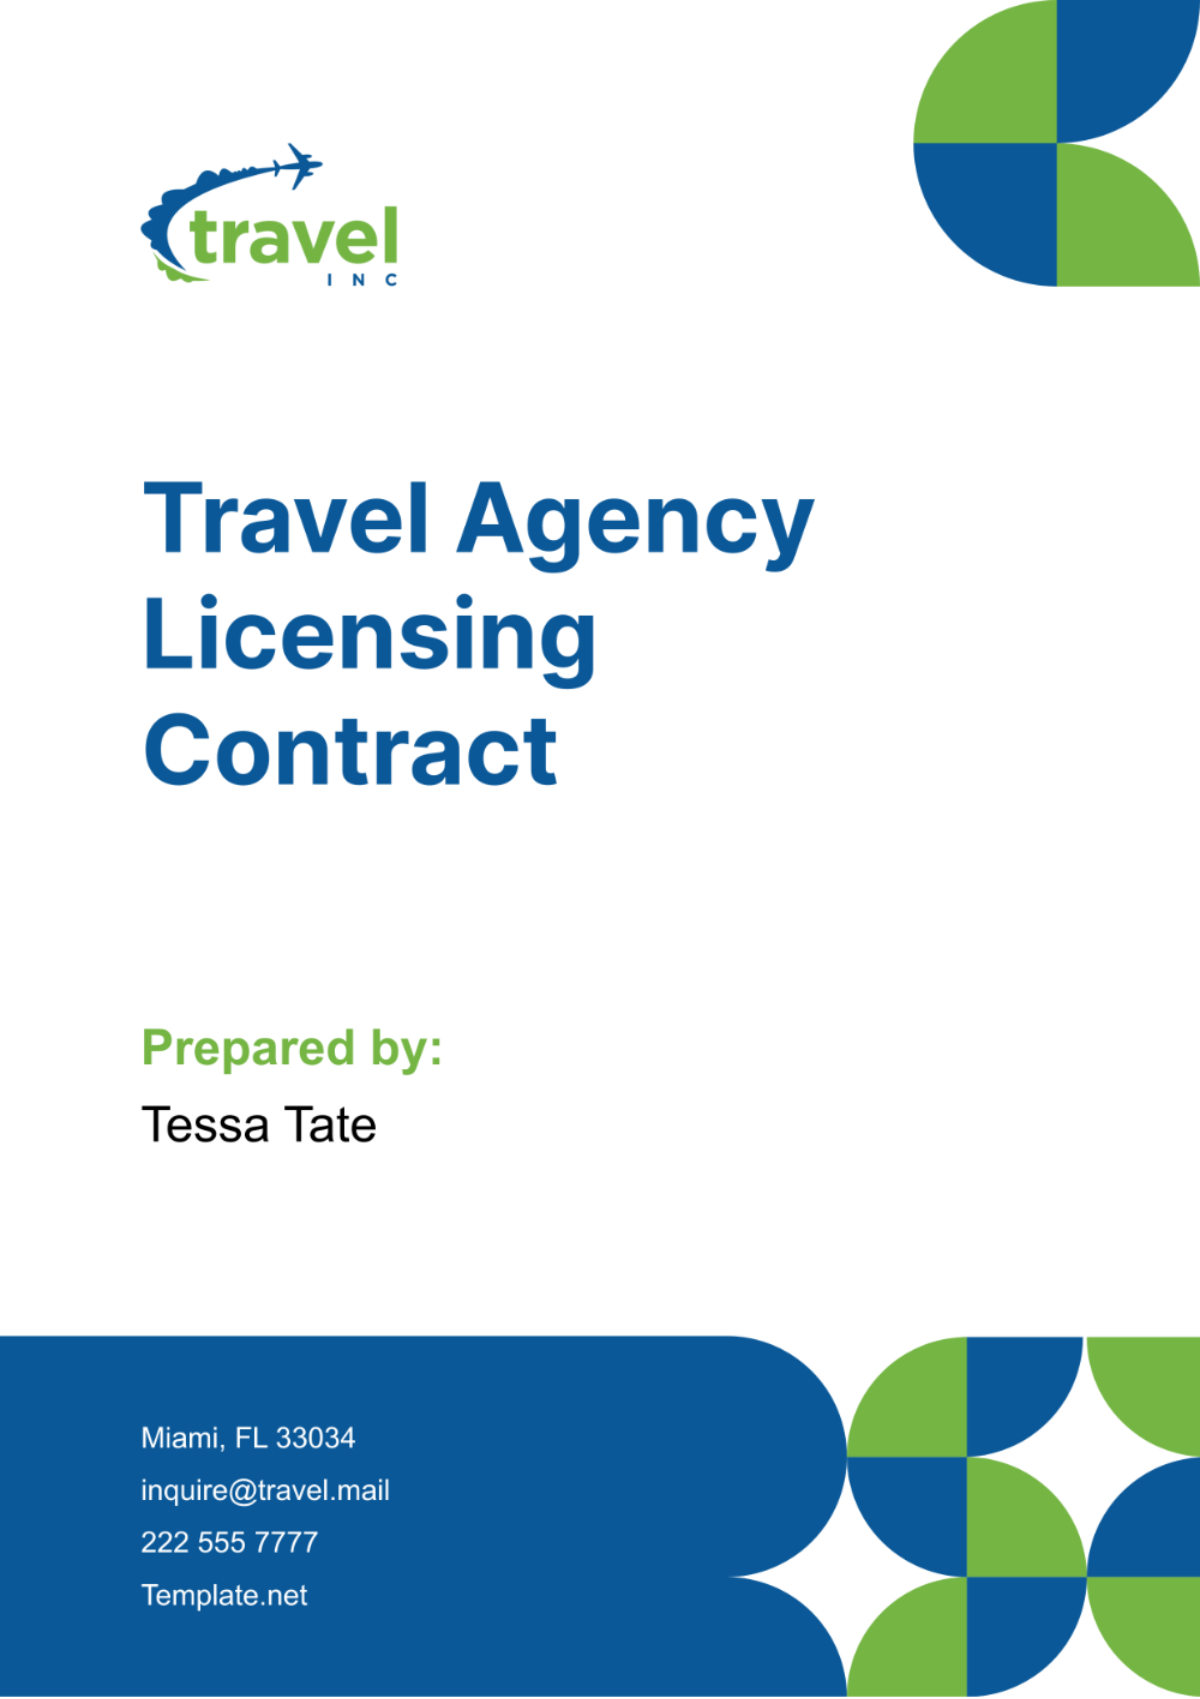 Travel Agency Licensing Contract Template